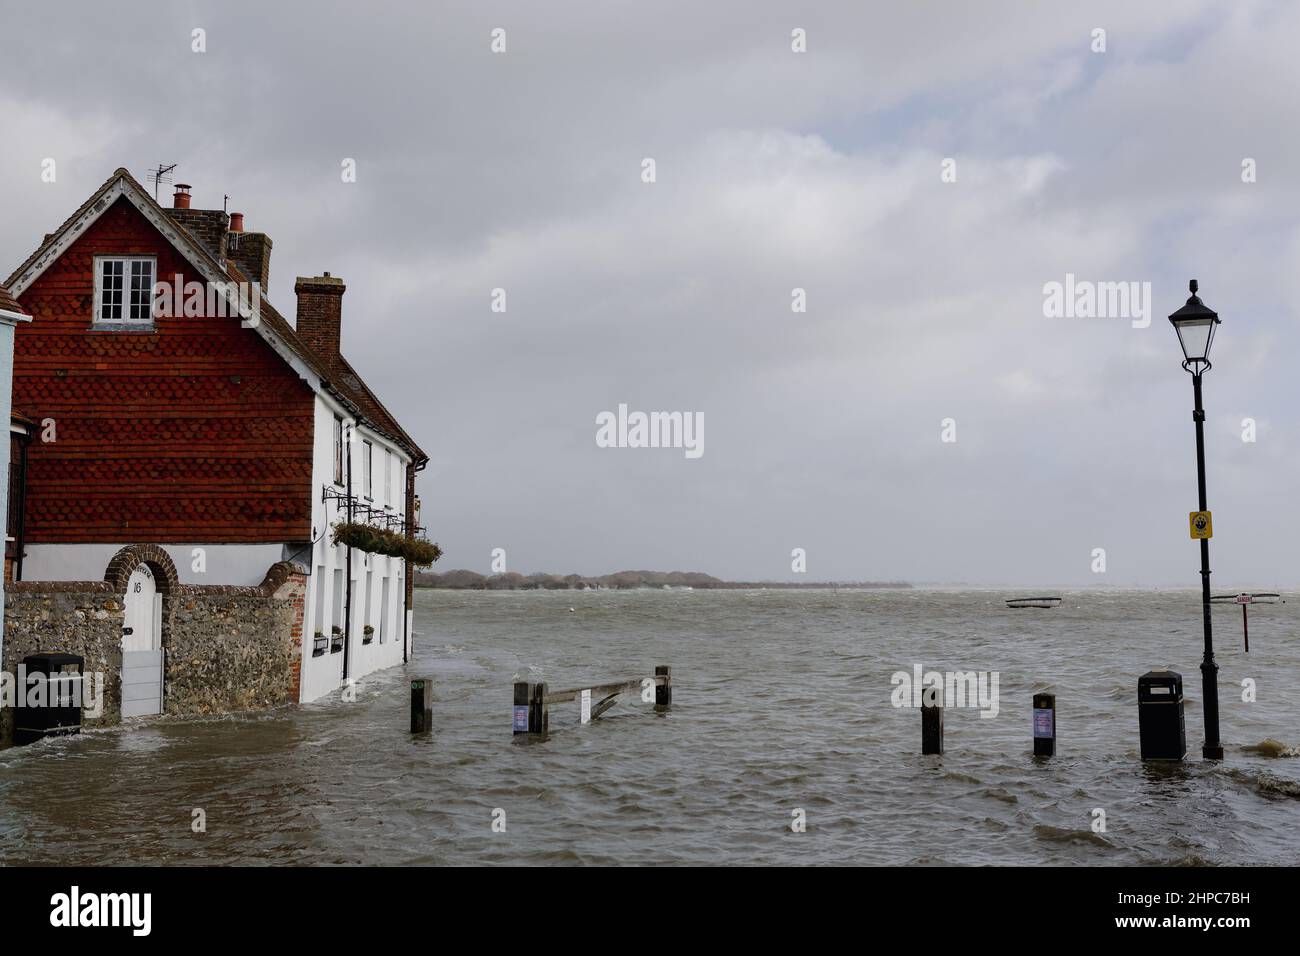 Flooding in the Havant area in the aftermath of Storm Eunice on the 18th February 2022. Stock Photo